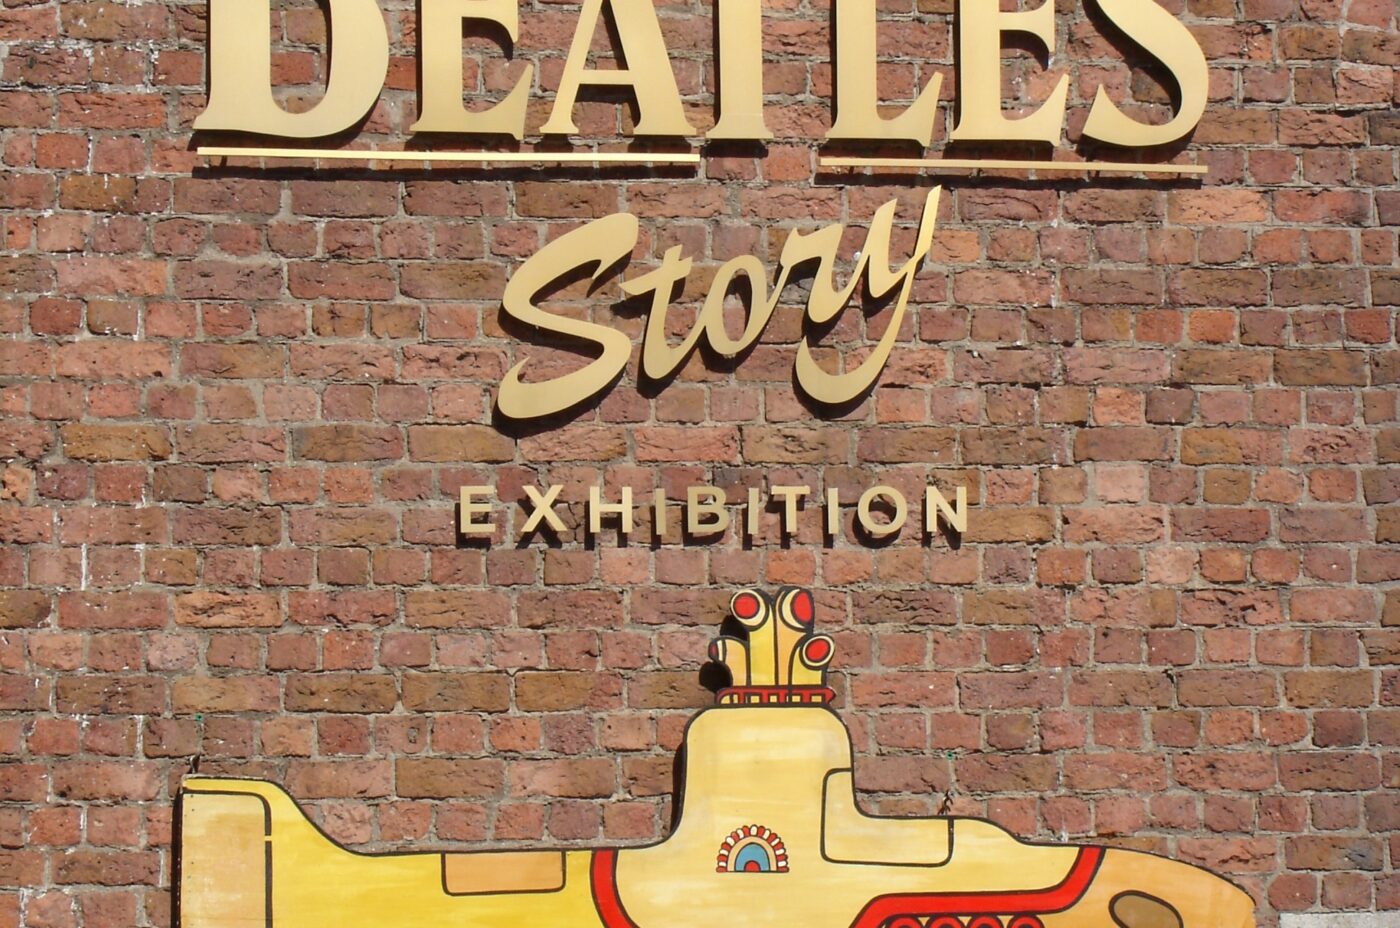 The Beatles Story Logo against a brick wall